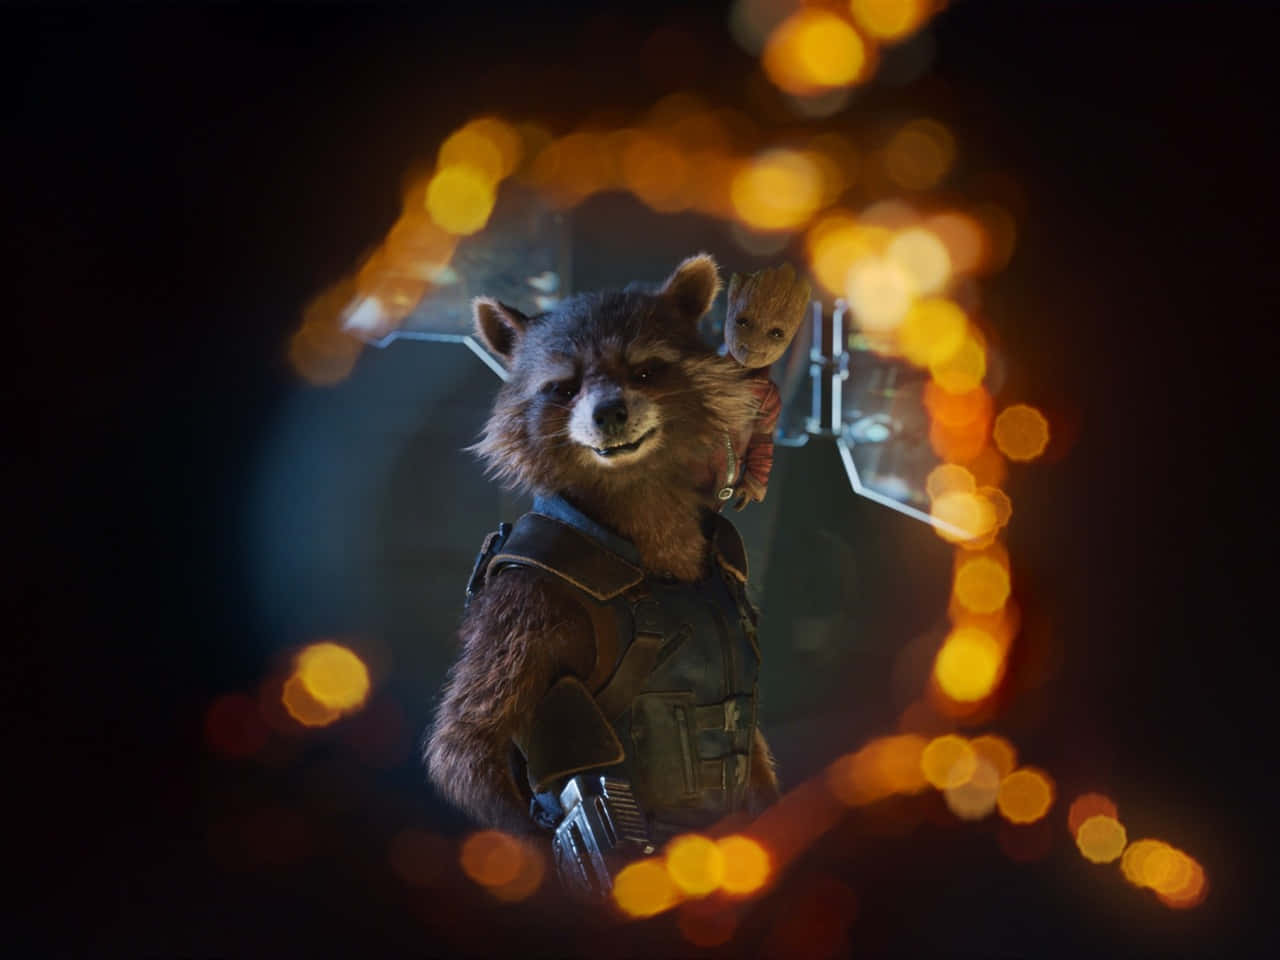 "An Epic Adventure awaits in Guardians of the Galaxy 2" Wallpaper